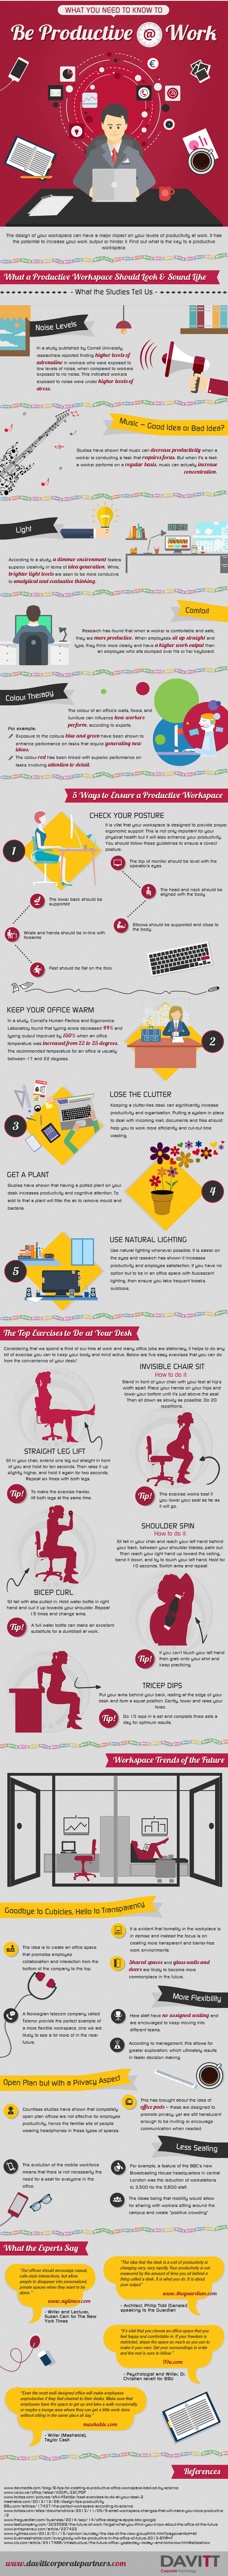 Today Maximum Productivity: What you need to know [Infographic]